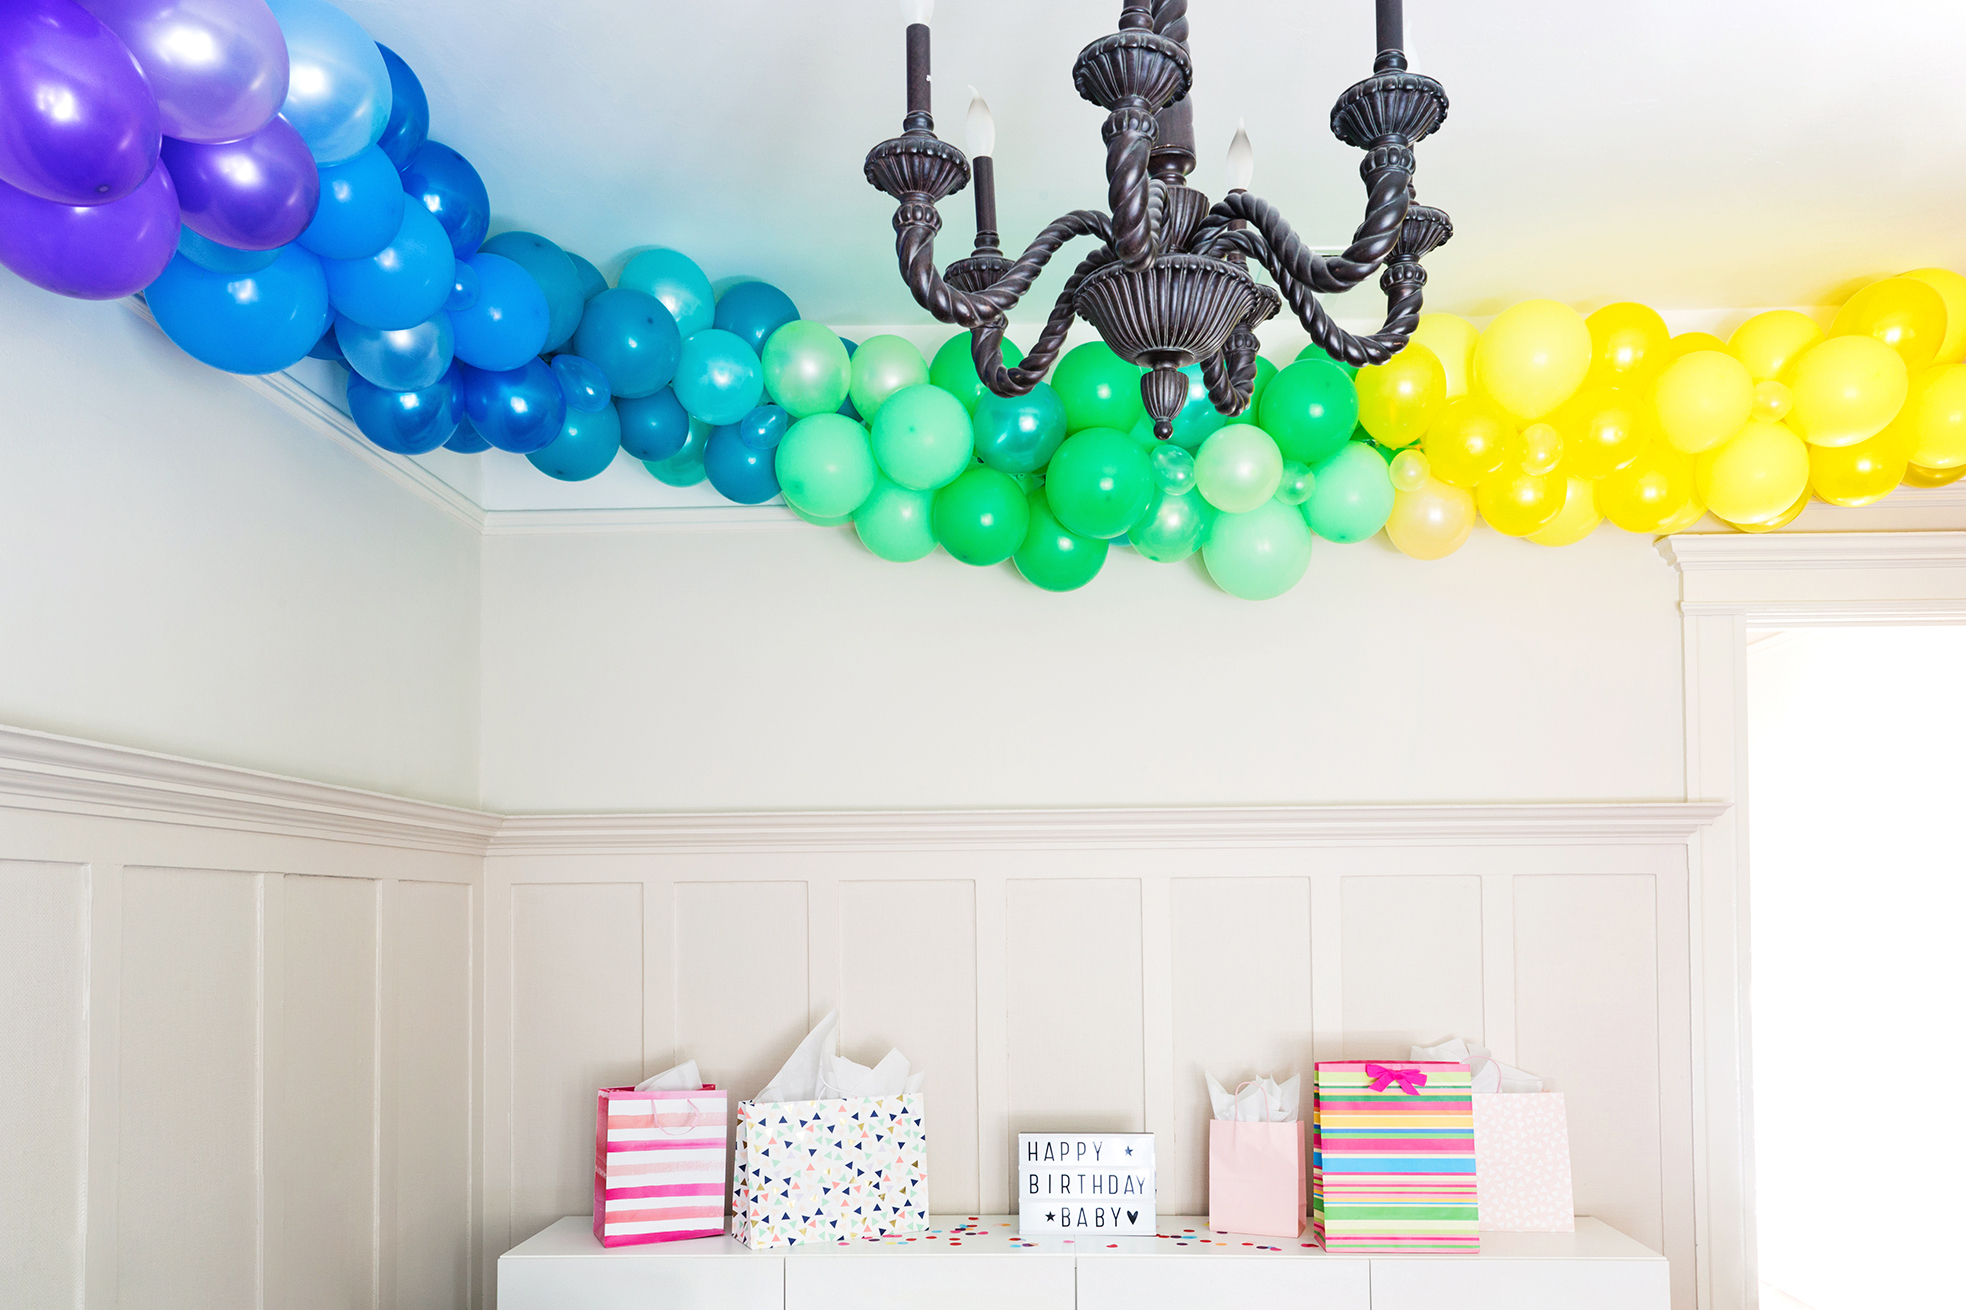 DIY Balloon Sign for a Party (Easy Balloon Decoration) - Cupcakes and  Cutlery